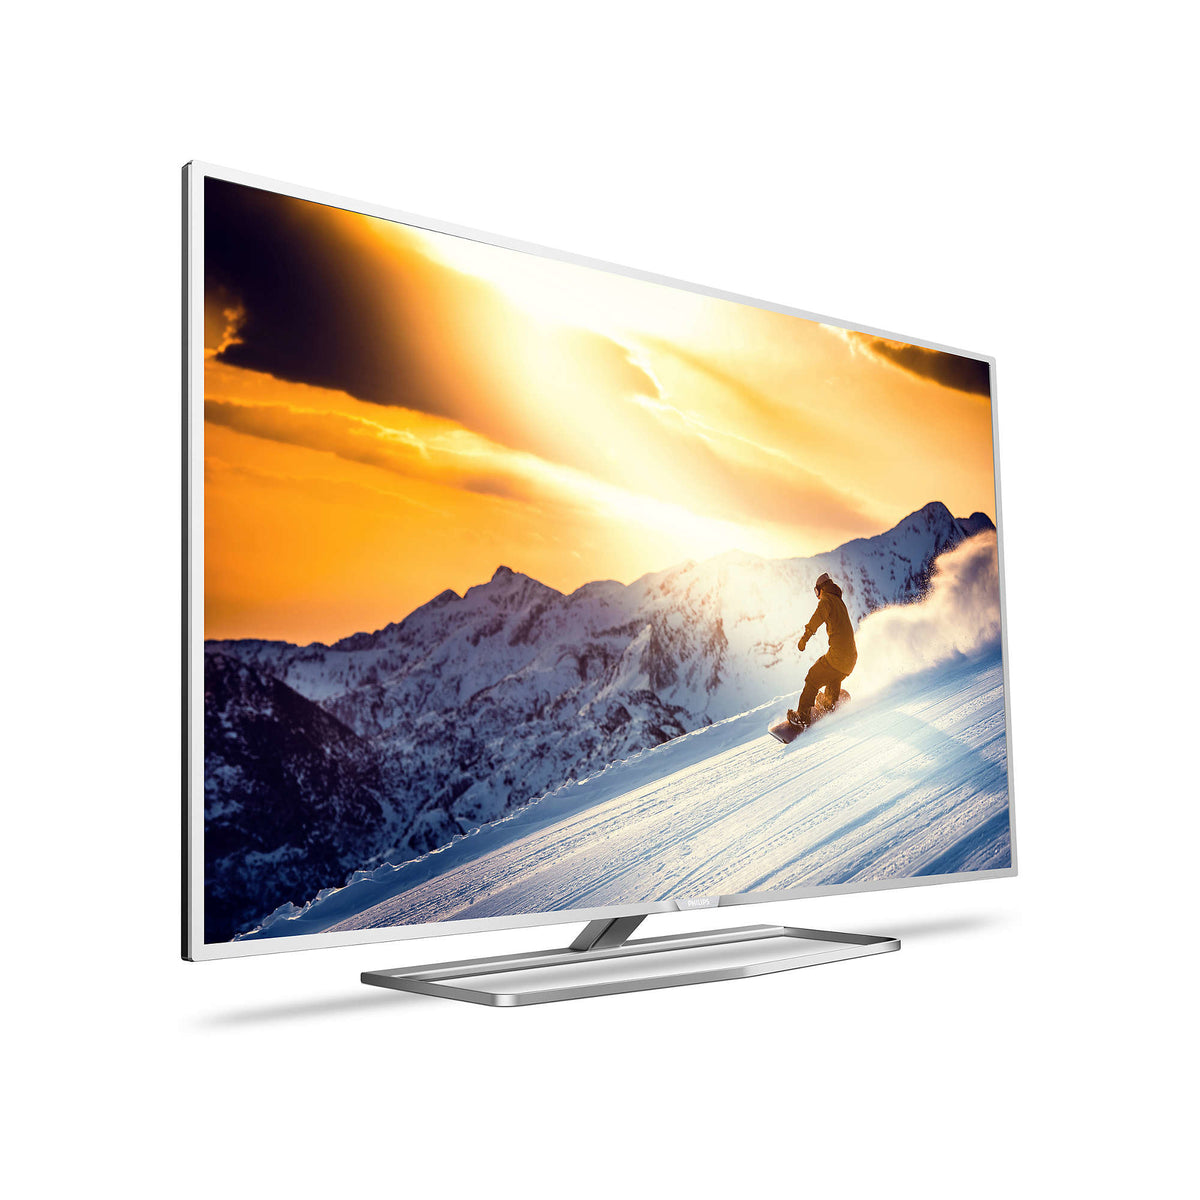 Philips 55HFL5011T - 55" MediaSuite Diagonal Class LCD TV with LED Backlight - Hotel / Hospitality - Smart TV - Android TV - 1080p 1920 x 1080 - Silver